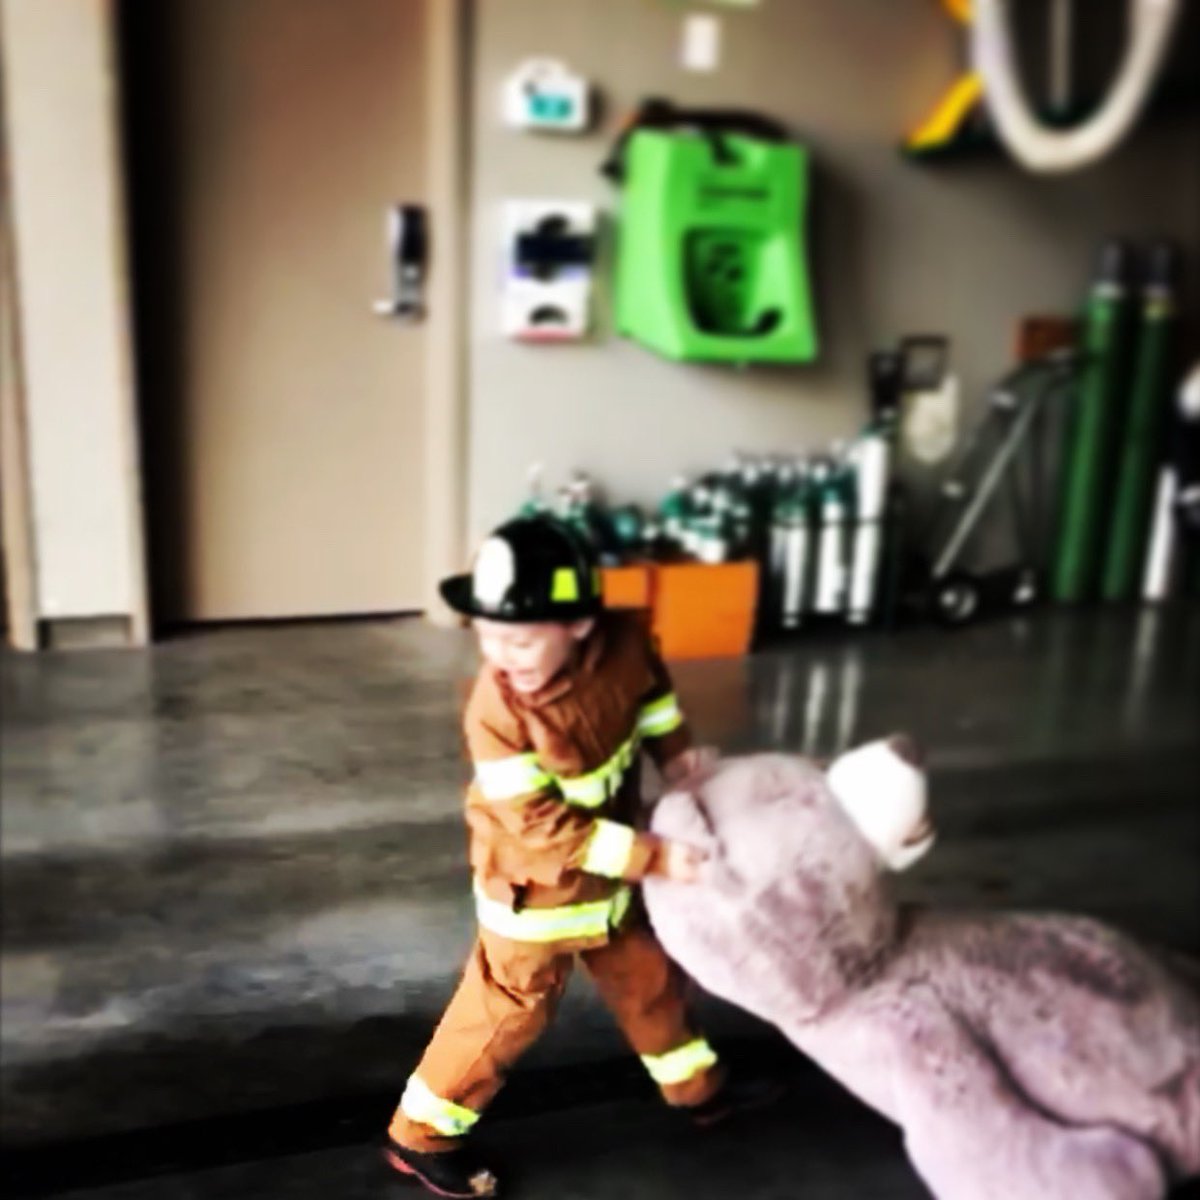 Can this be the real physical🔥? If so, I’m in👩🏼‍🚒! There is a slight chance this cutie my still beat me🚒, and that just might be ok.😍

Saving lives, one giant teddy bear 🧸 at a time. 

#womeninfirefighting #beardrag #womenfirefighters #putmeincoach #ambition #badasswithagoodass